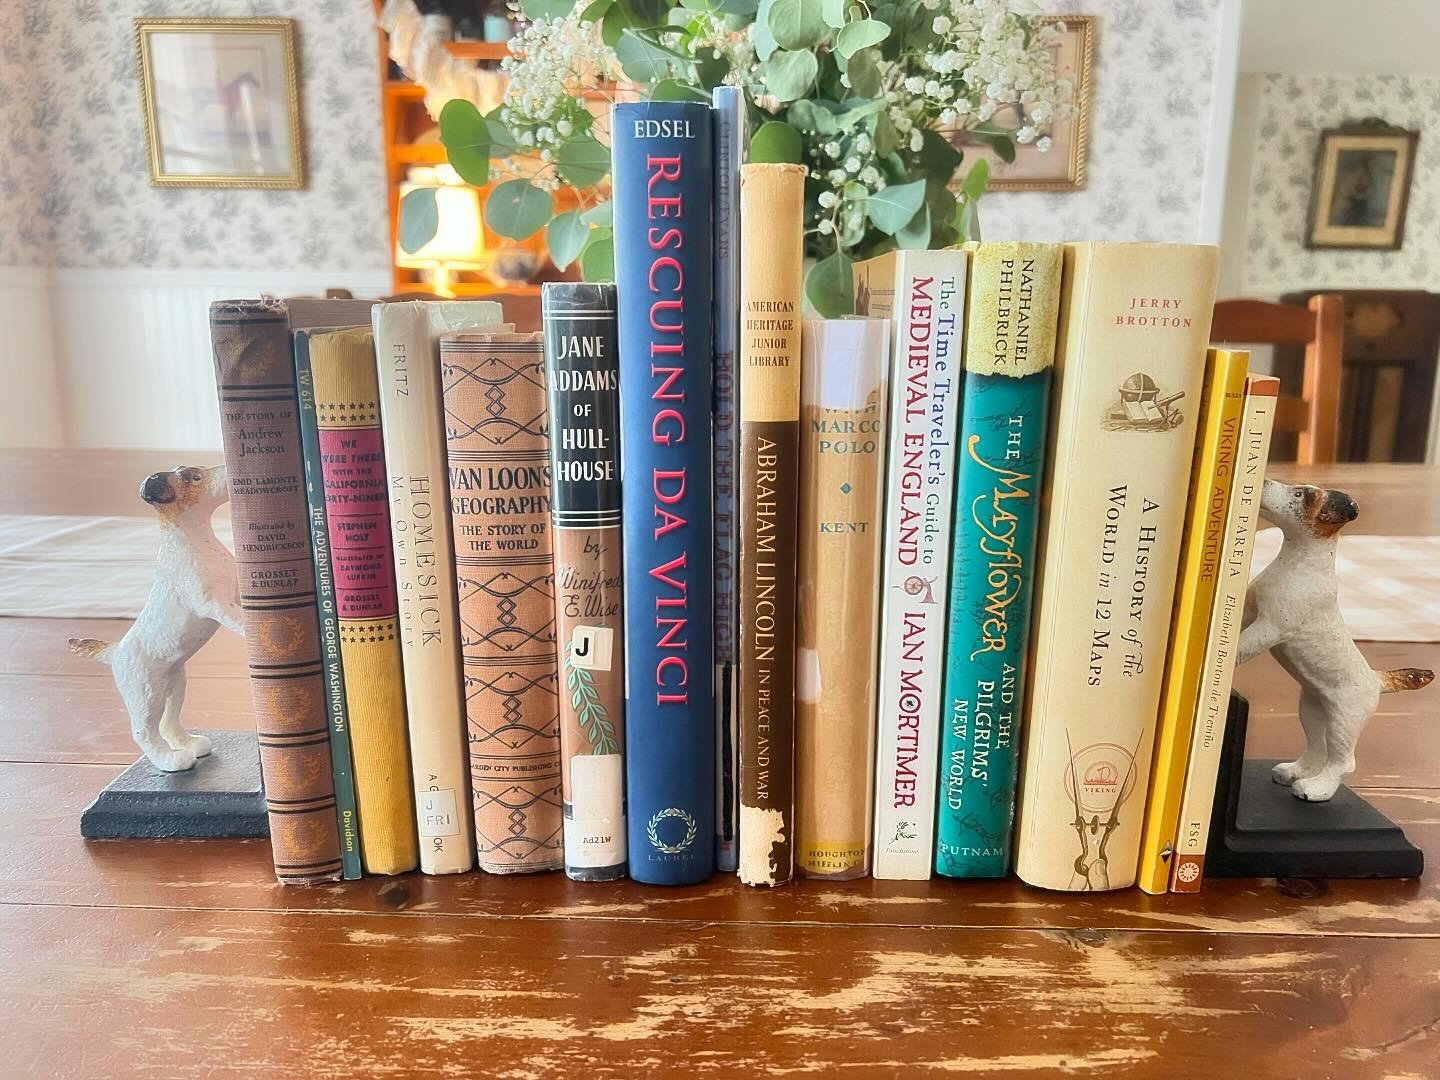 Sneak peek number two for the two-day #historybooks_may24 sale!

This sale begins tomorrow and goes through Thursday. Let me know if you would like a tag on any of these books!